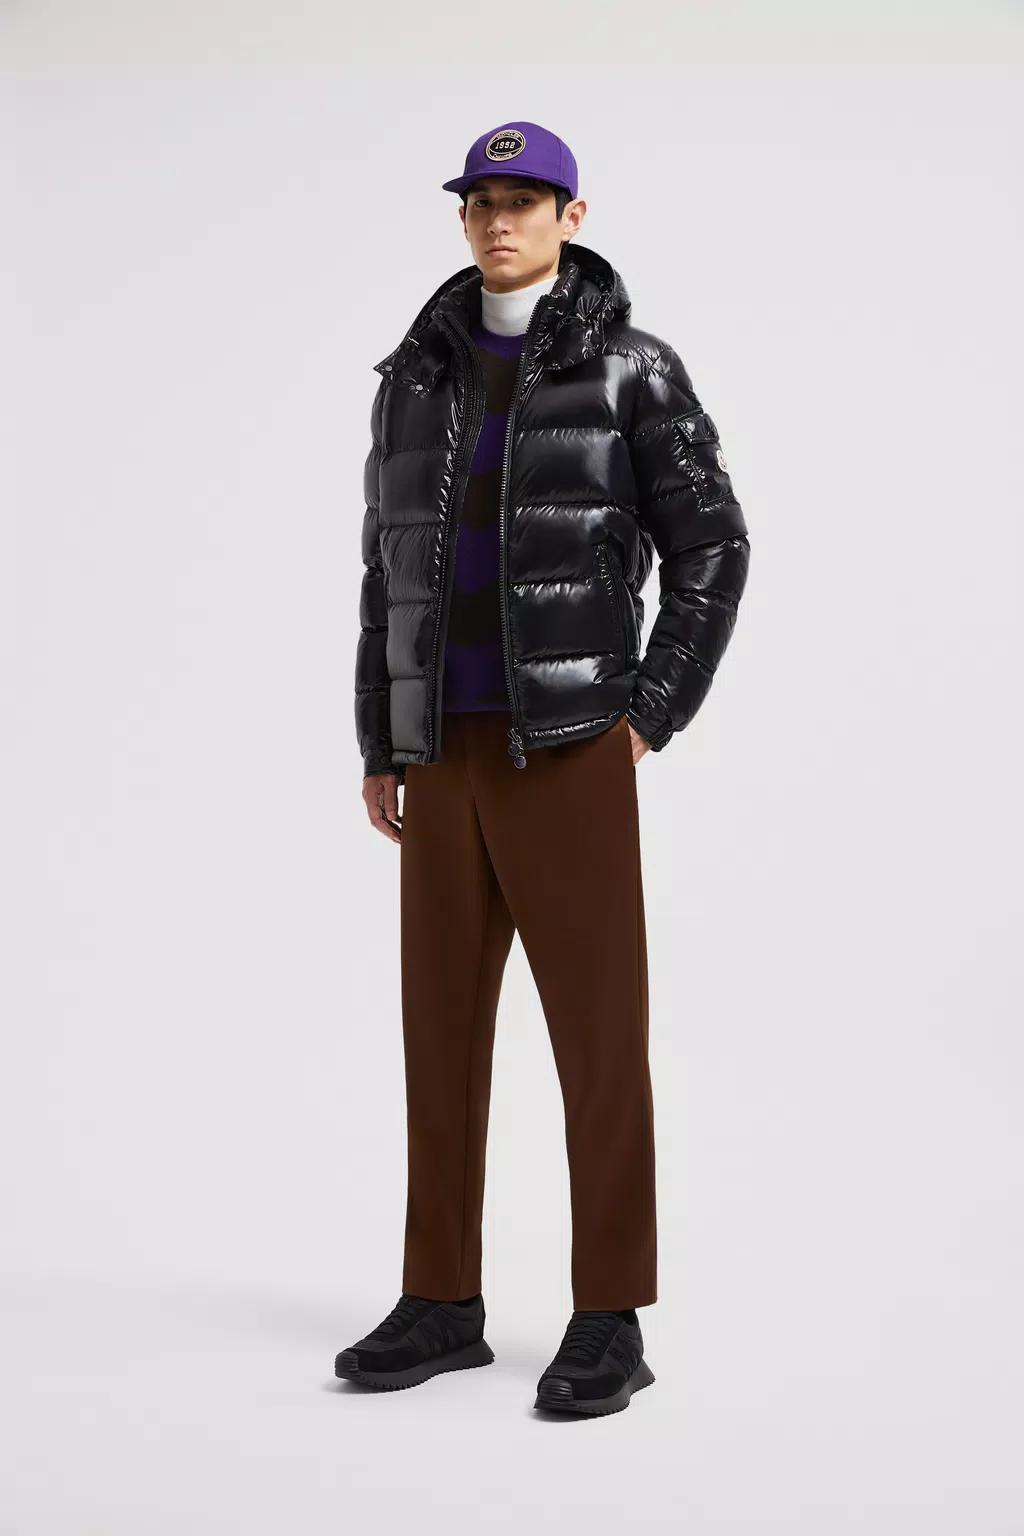 Men's Clothing - Coats, Down Jackets & Accessories